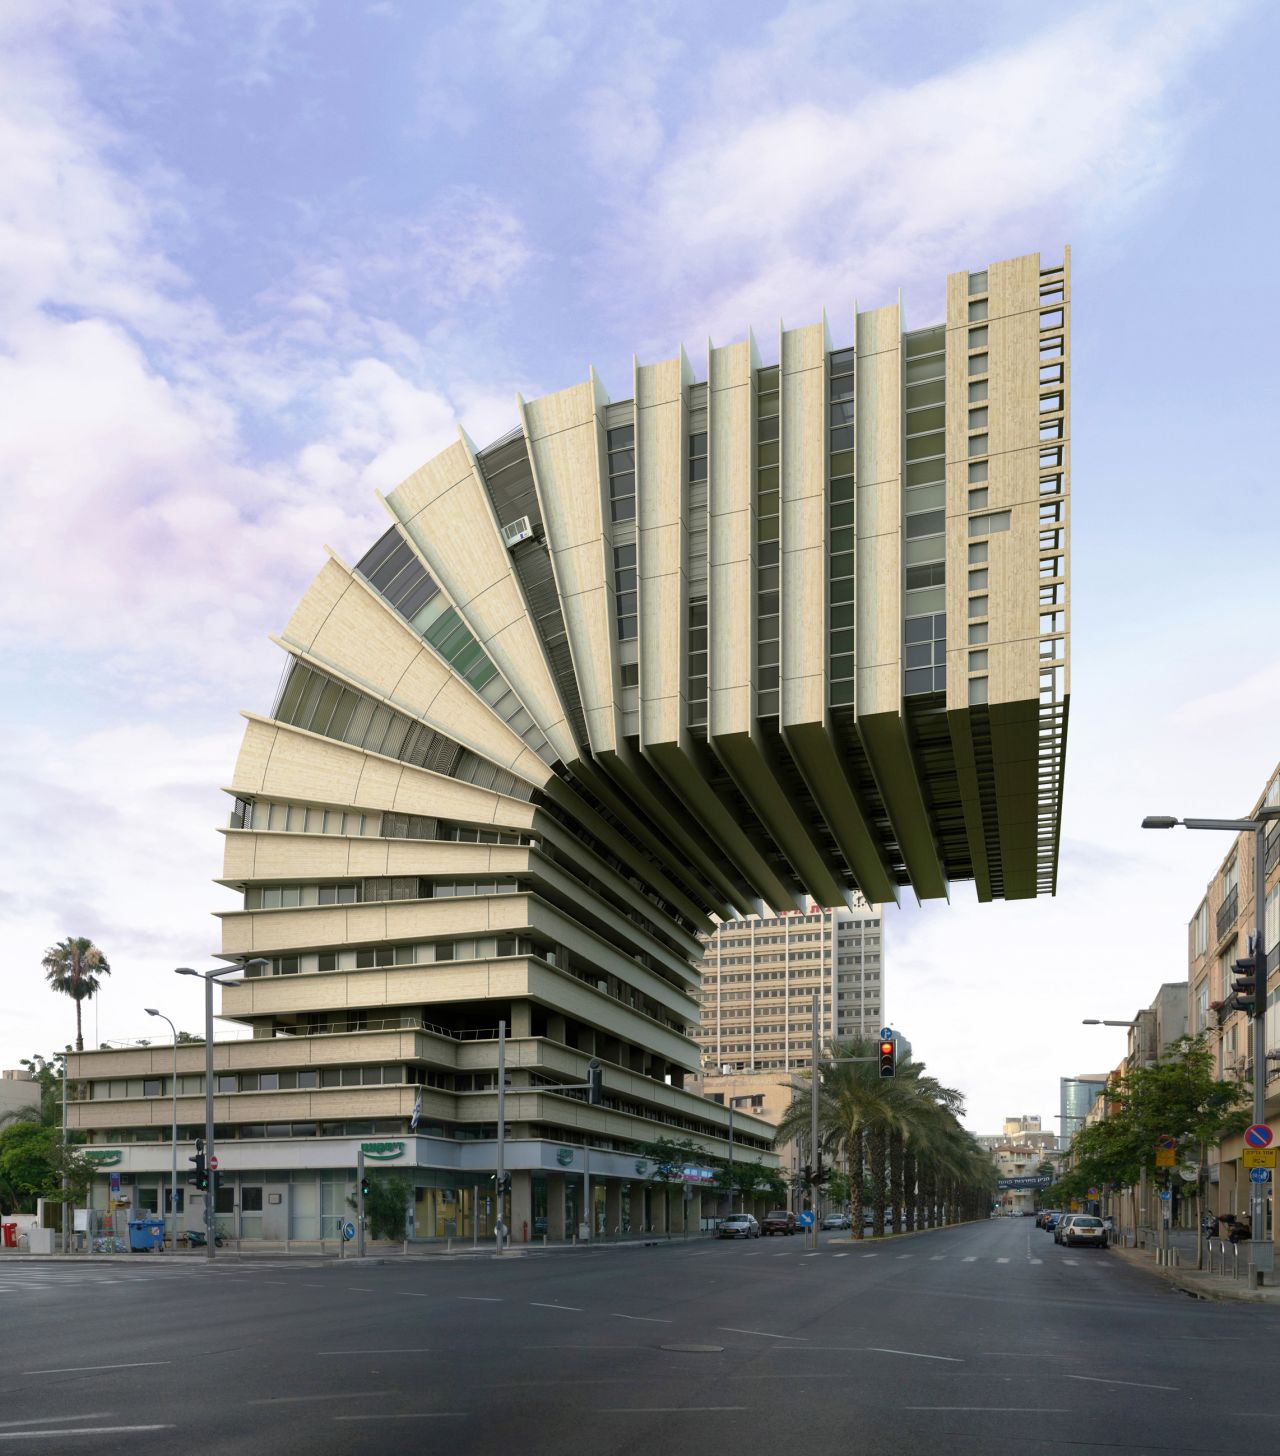 <em>Impossible Buildings by Victor Enrich</em><br /><br />Using 3D architectural visualization, artist Victor Enrich transforms drab tower blocks and apartments into flexible structures that bend, twist turn inwards and protrude outwards. By fusing photography with digital manipulation, Enrich creates dreamworlds where the familiar takes an unexpected turn. <br /> 